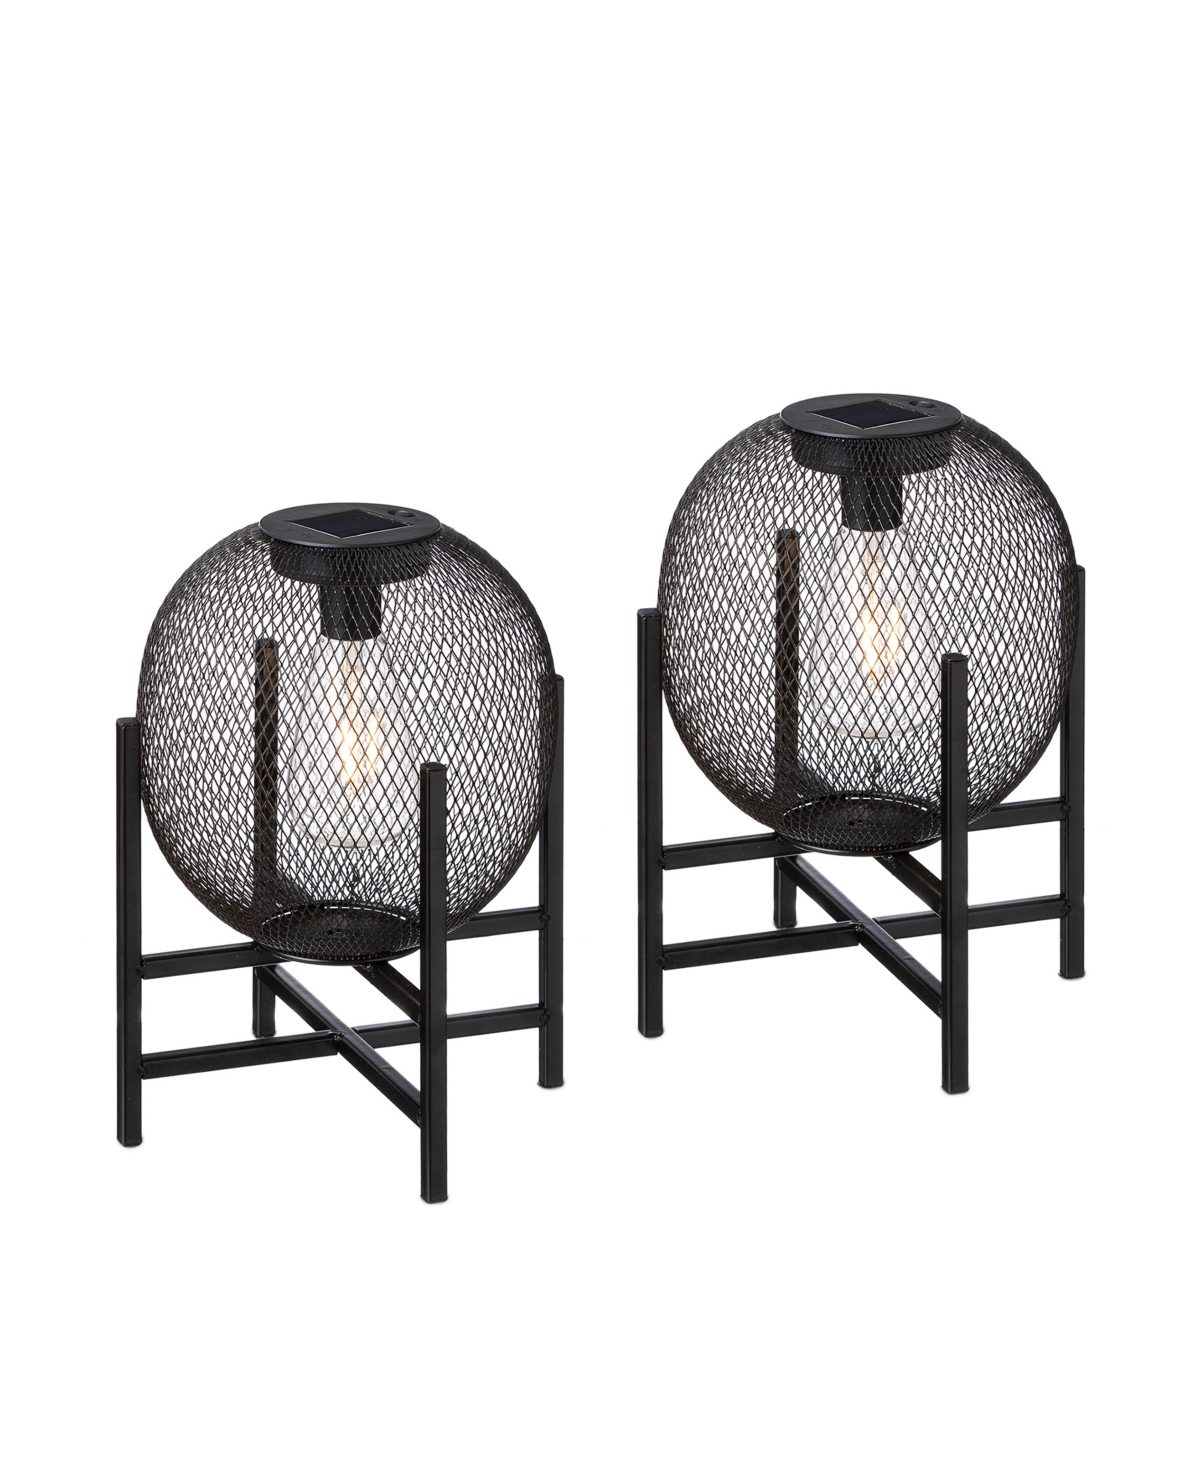 11.5" H Metal Mesh Solar Powered Outdoor Lantern with Stand, Set of 2 - Black